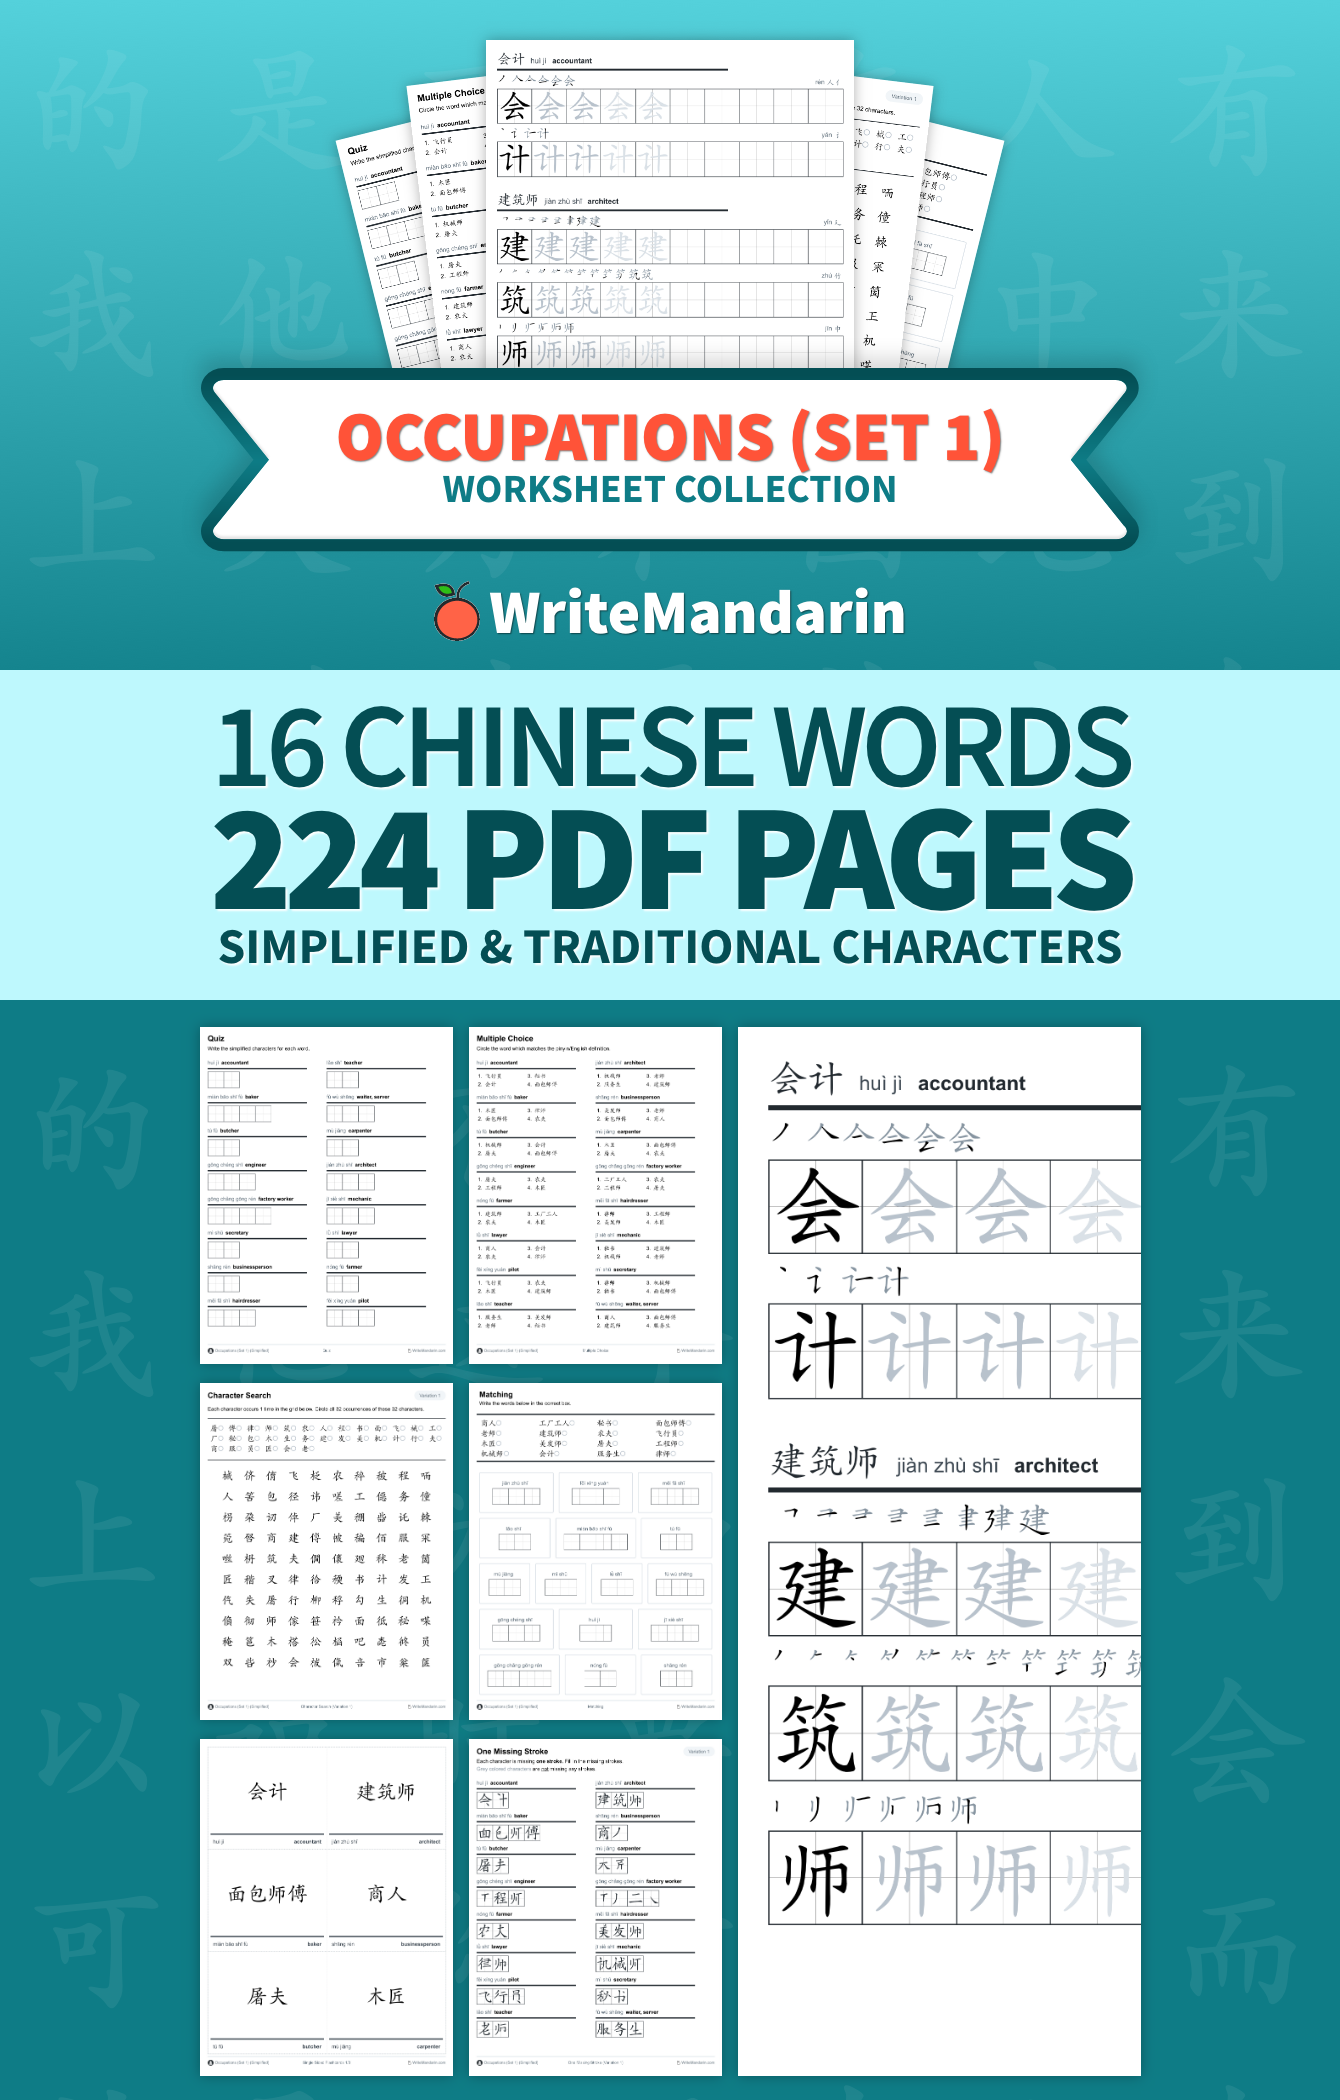 Preview image of Occupations (Set 1) worksheet collection